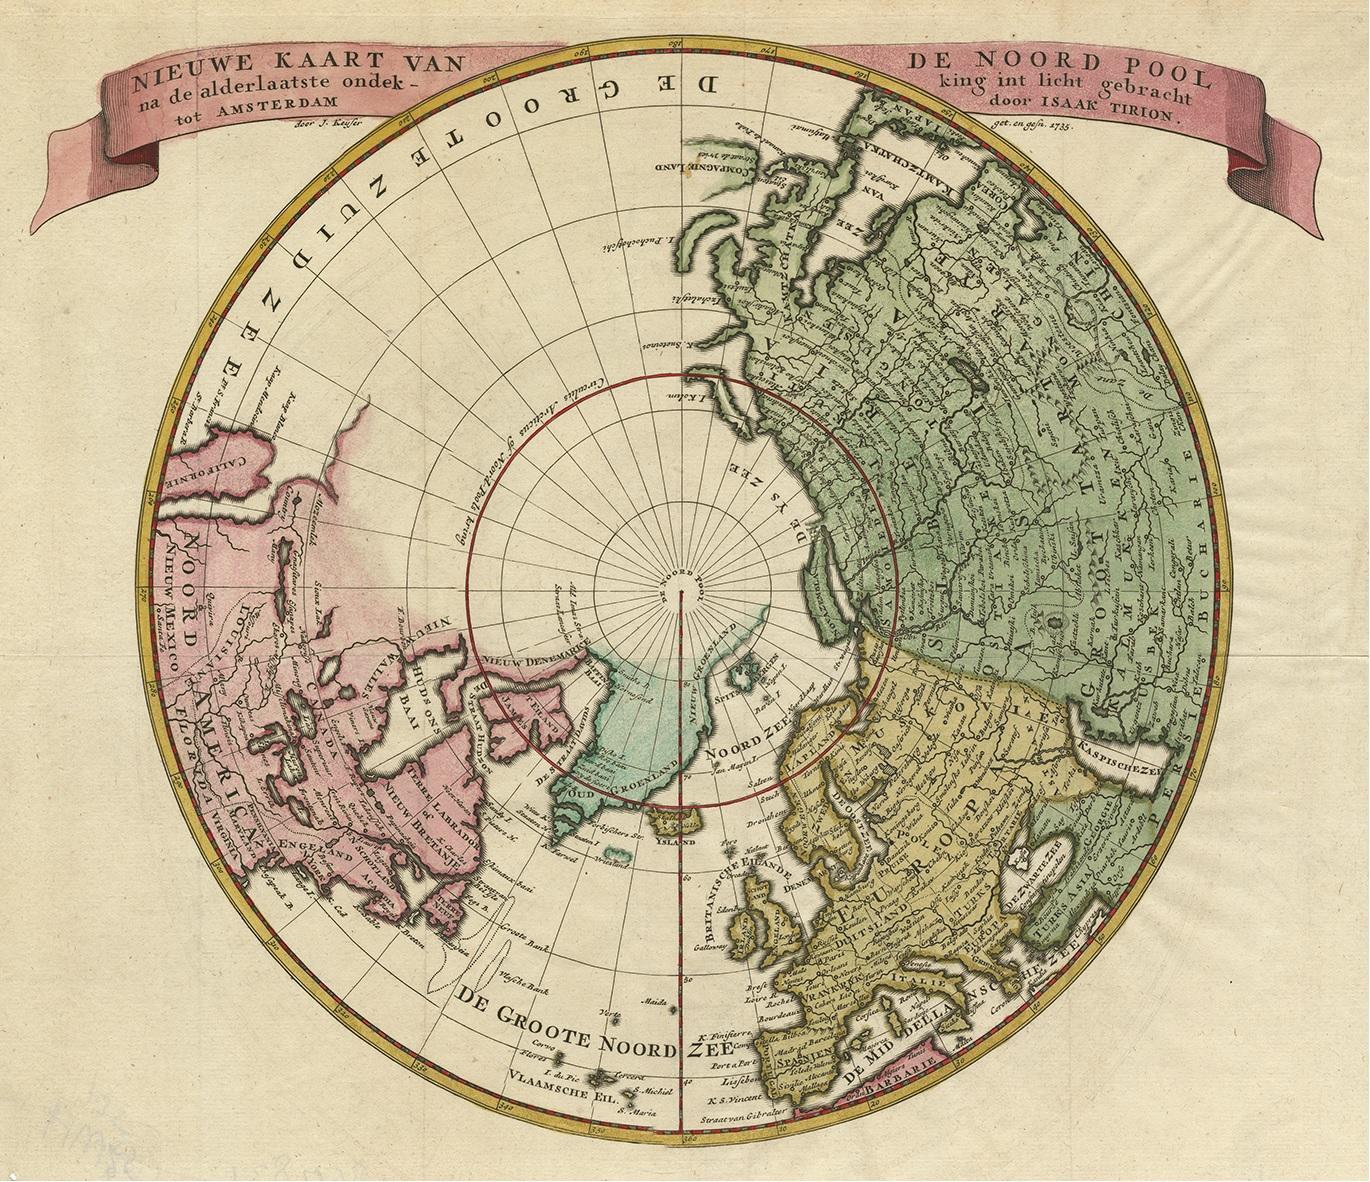 Antique map titled 'Nieuwe Kaart van de Noord Pool na de alderlaatste ondekking int licht gebracht'. Map of the Northern Hemisphere and North Pole, which shows the NE Passage, but no definite NW Passage. California is shown as an Island, along with